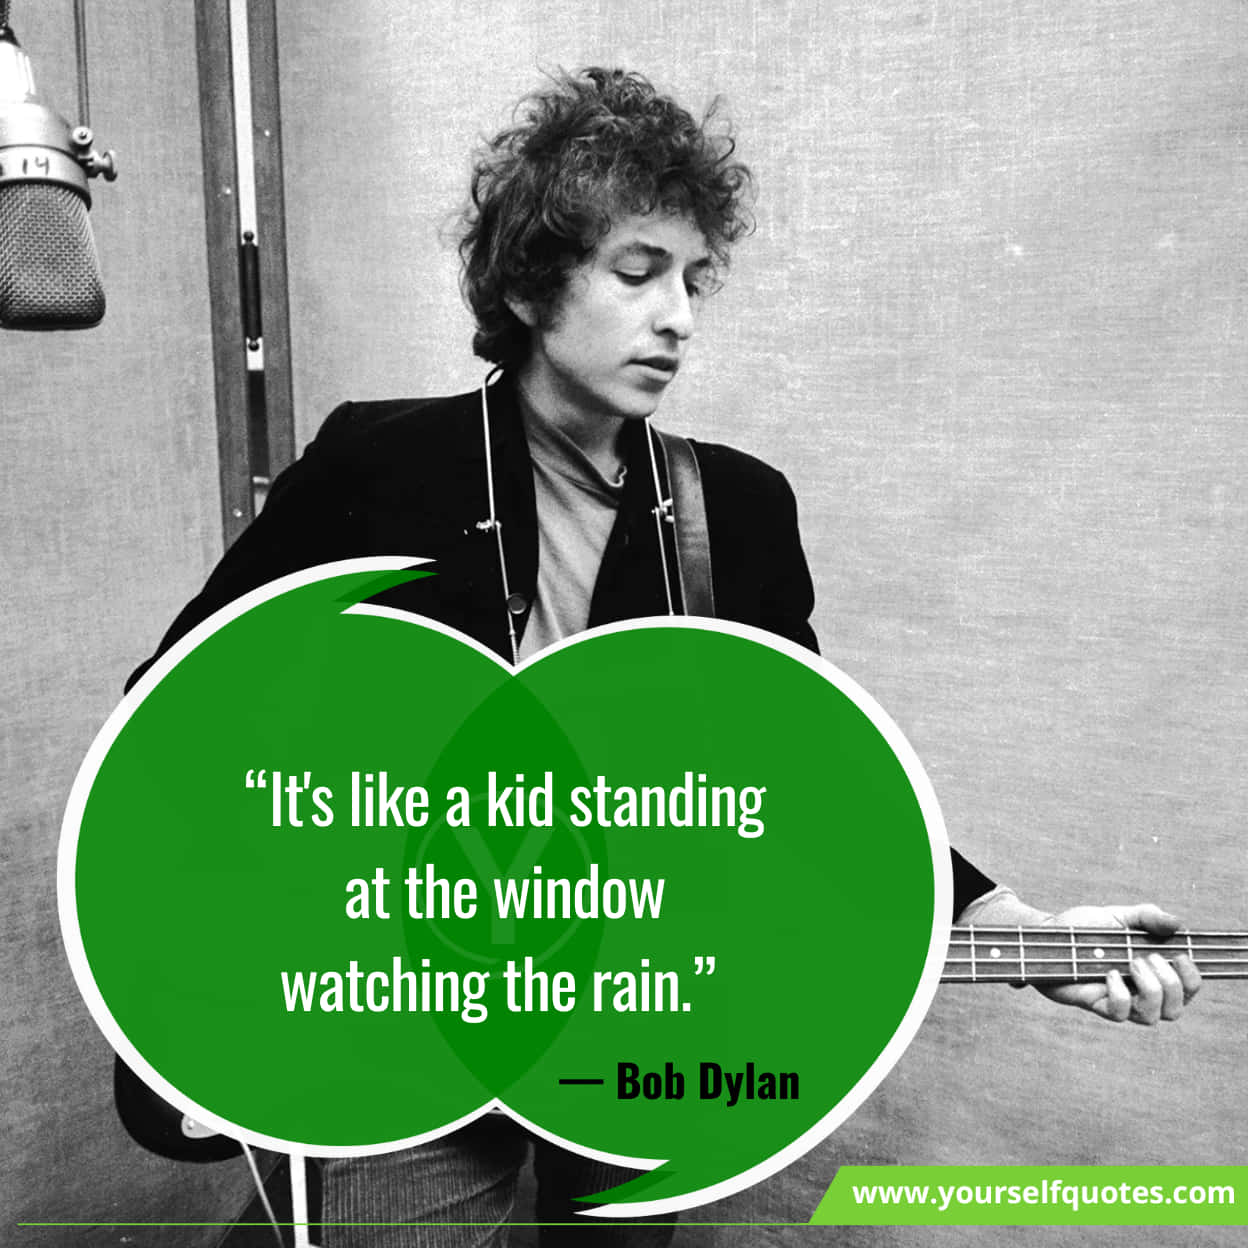 Inspirational Bob Dylan Quotes for Music